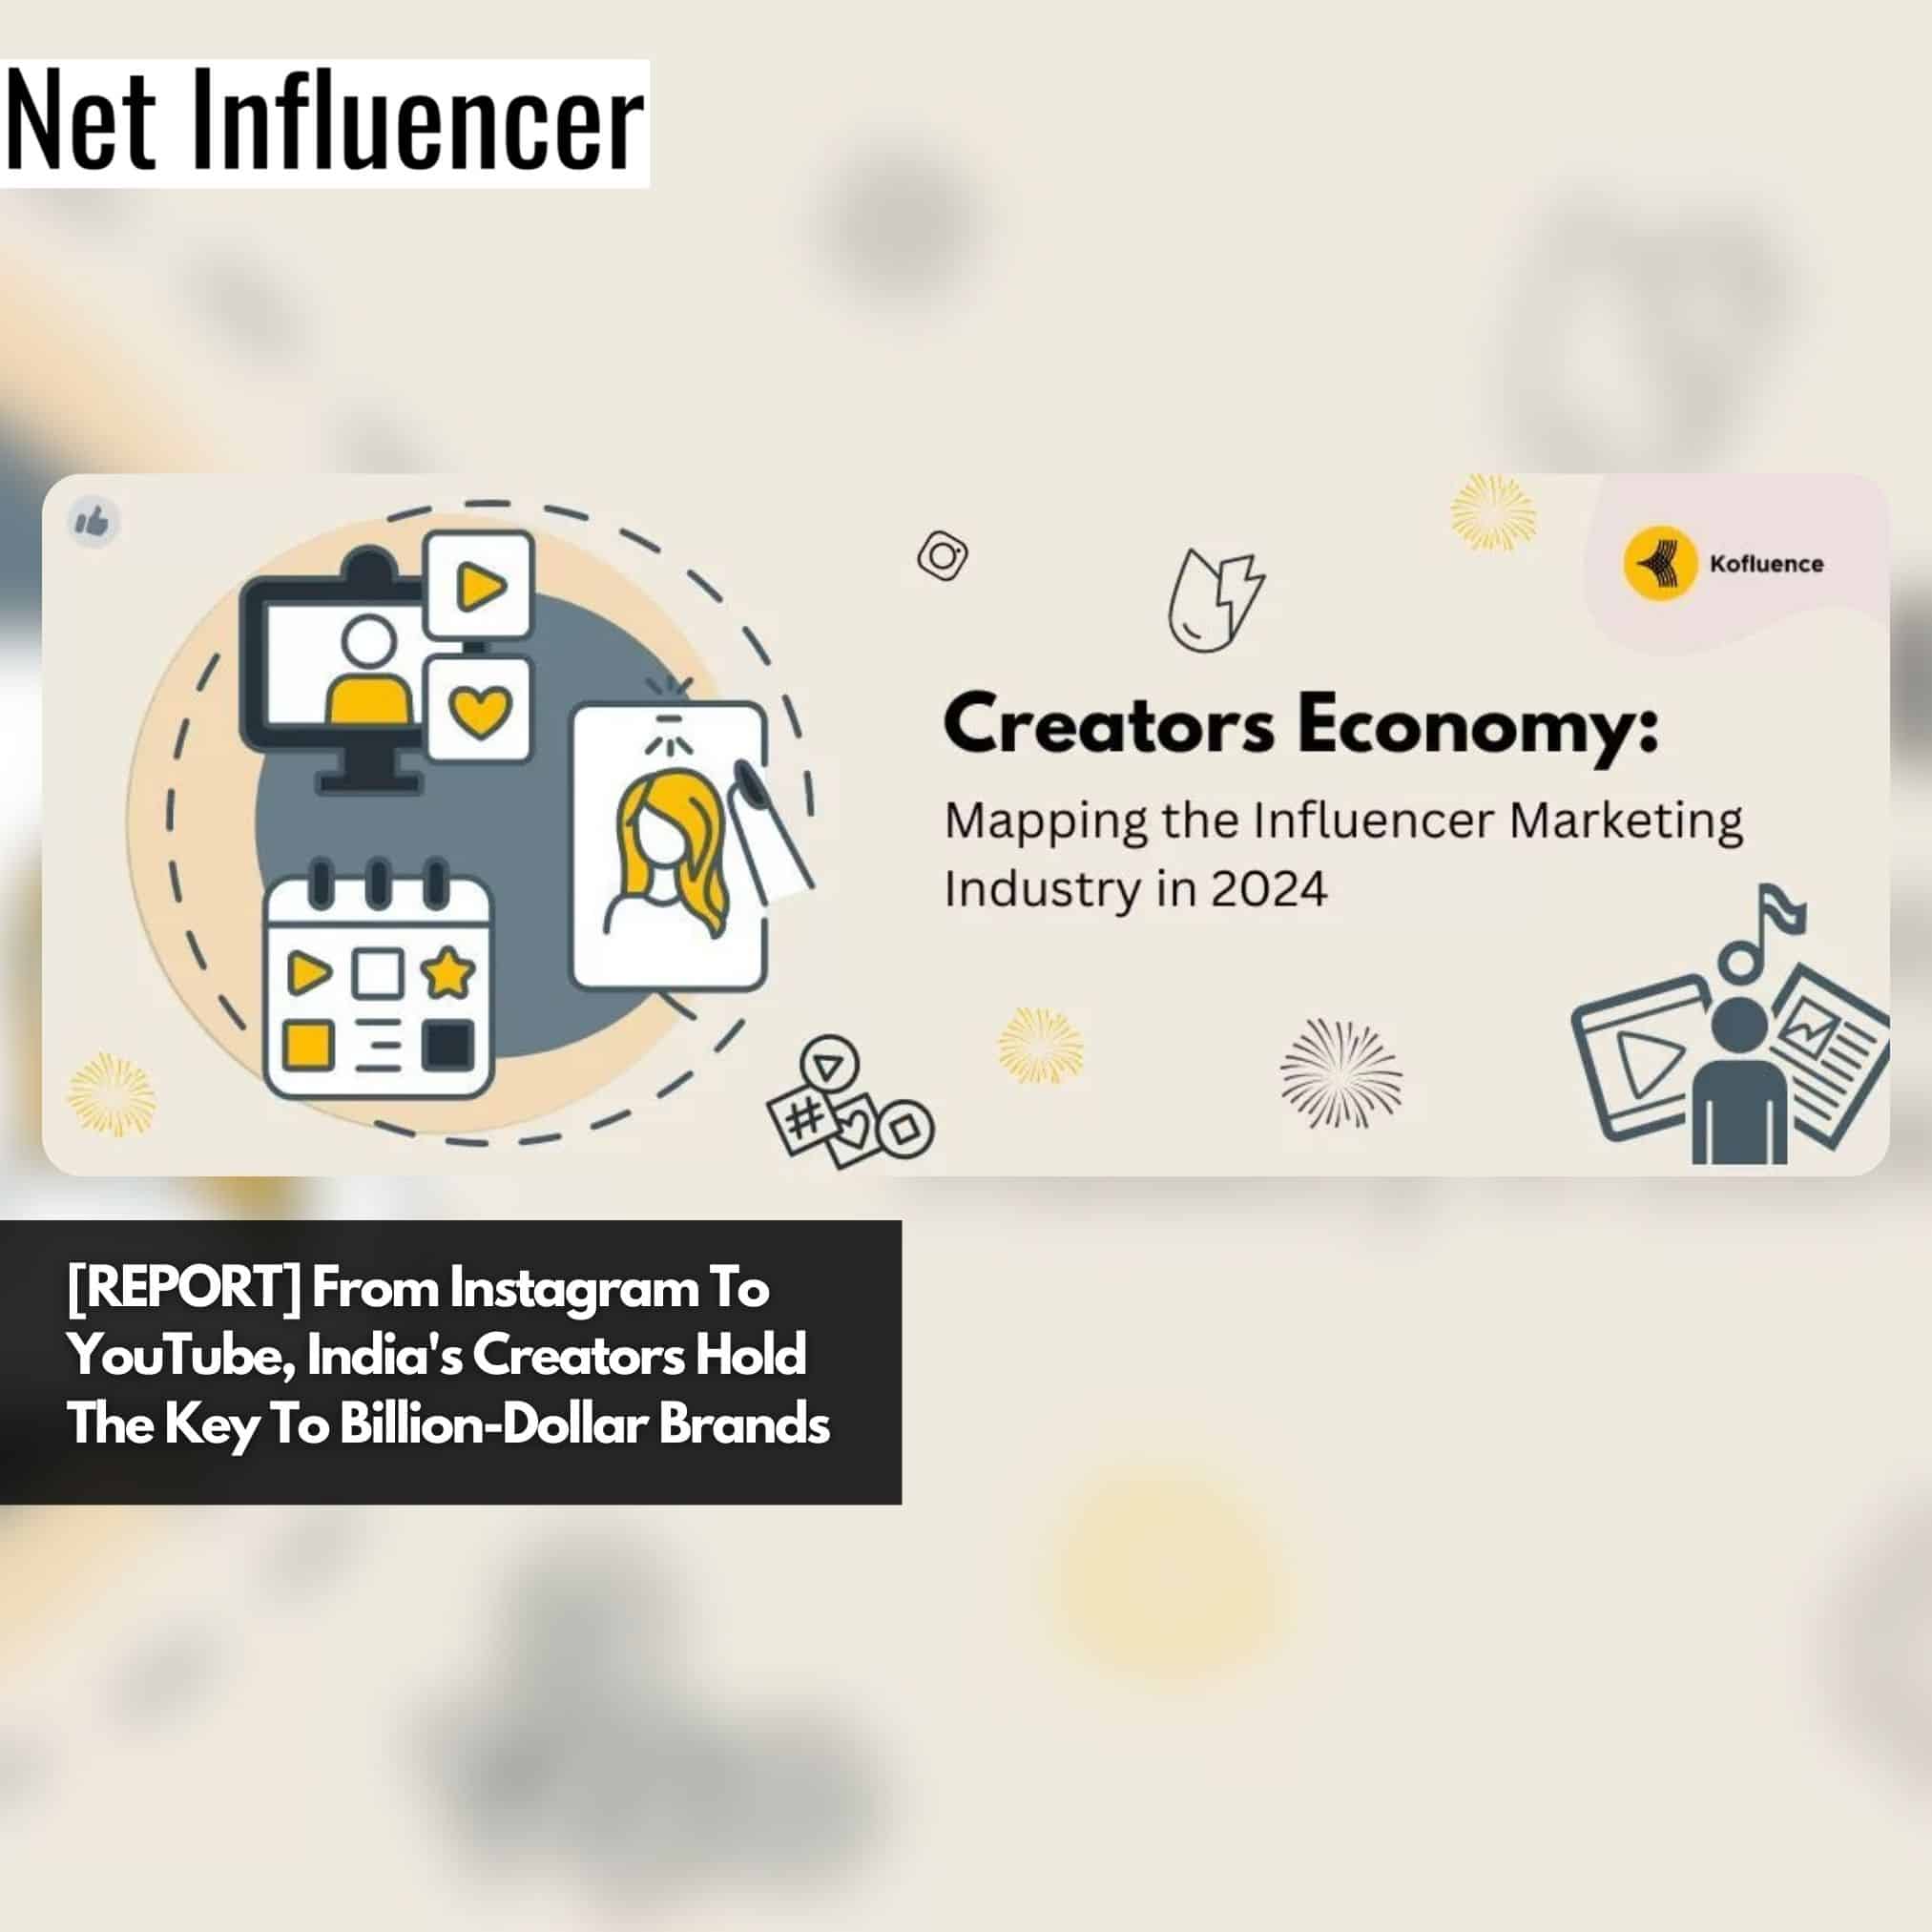 [REPORT] From Instagram To YouTube, India's Creators Hold The Key To Billion-Dollar Brands